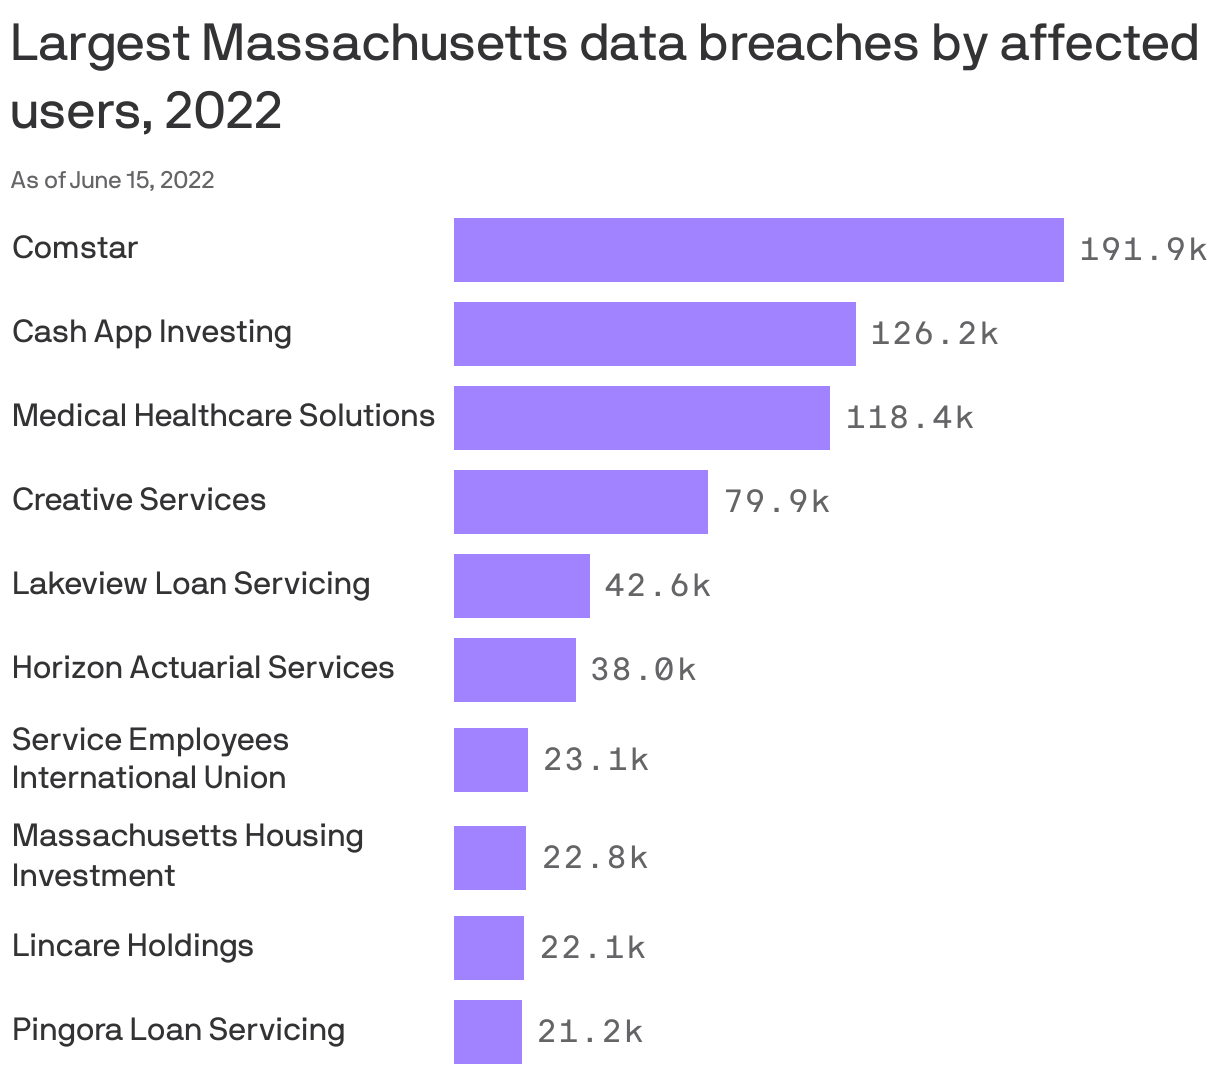 Largest Massachusetts data breaches by affected users, 2022